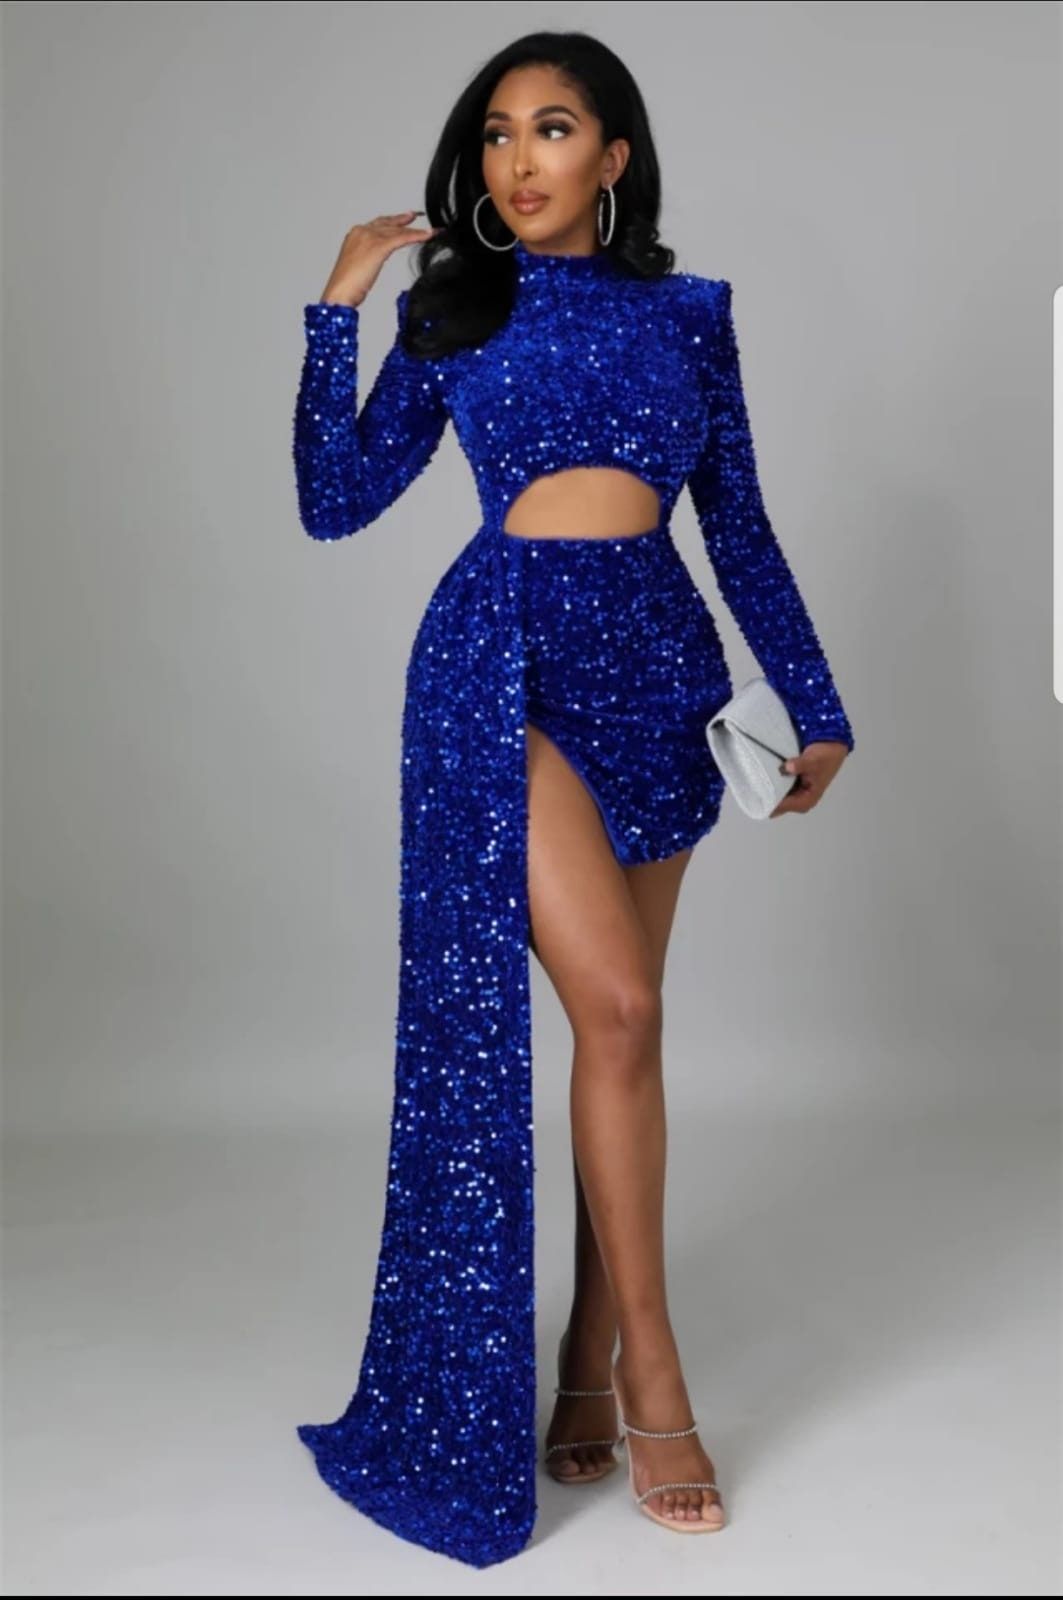 Blue Sparkly Dress Outfit
  Ideas